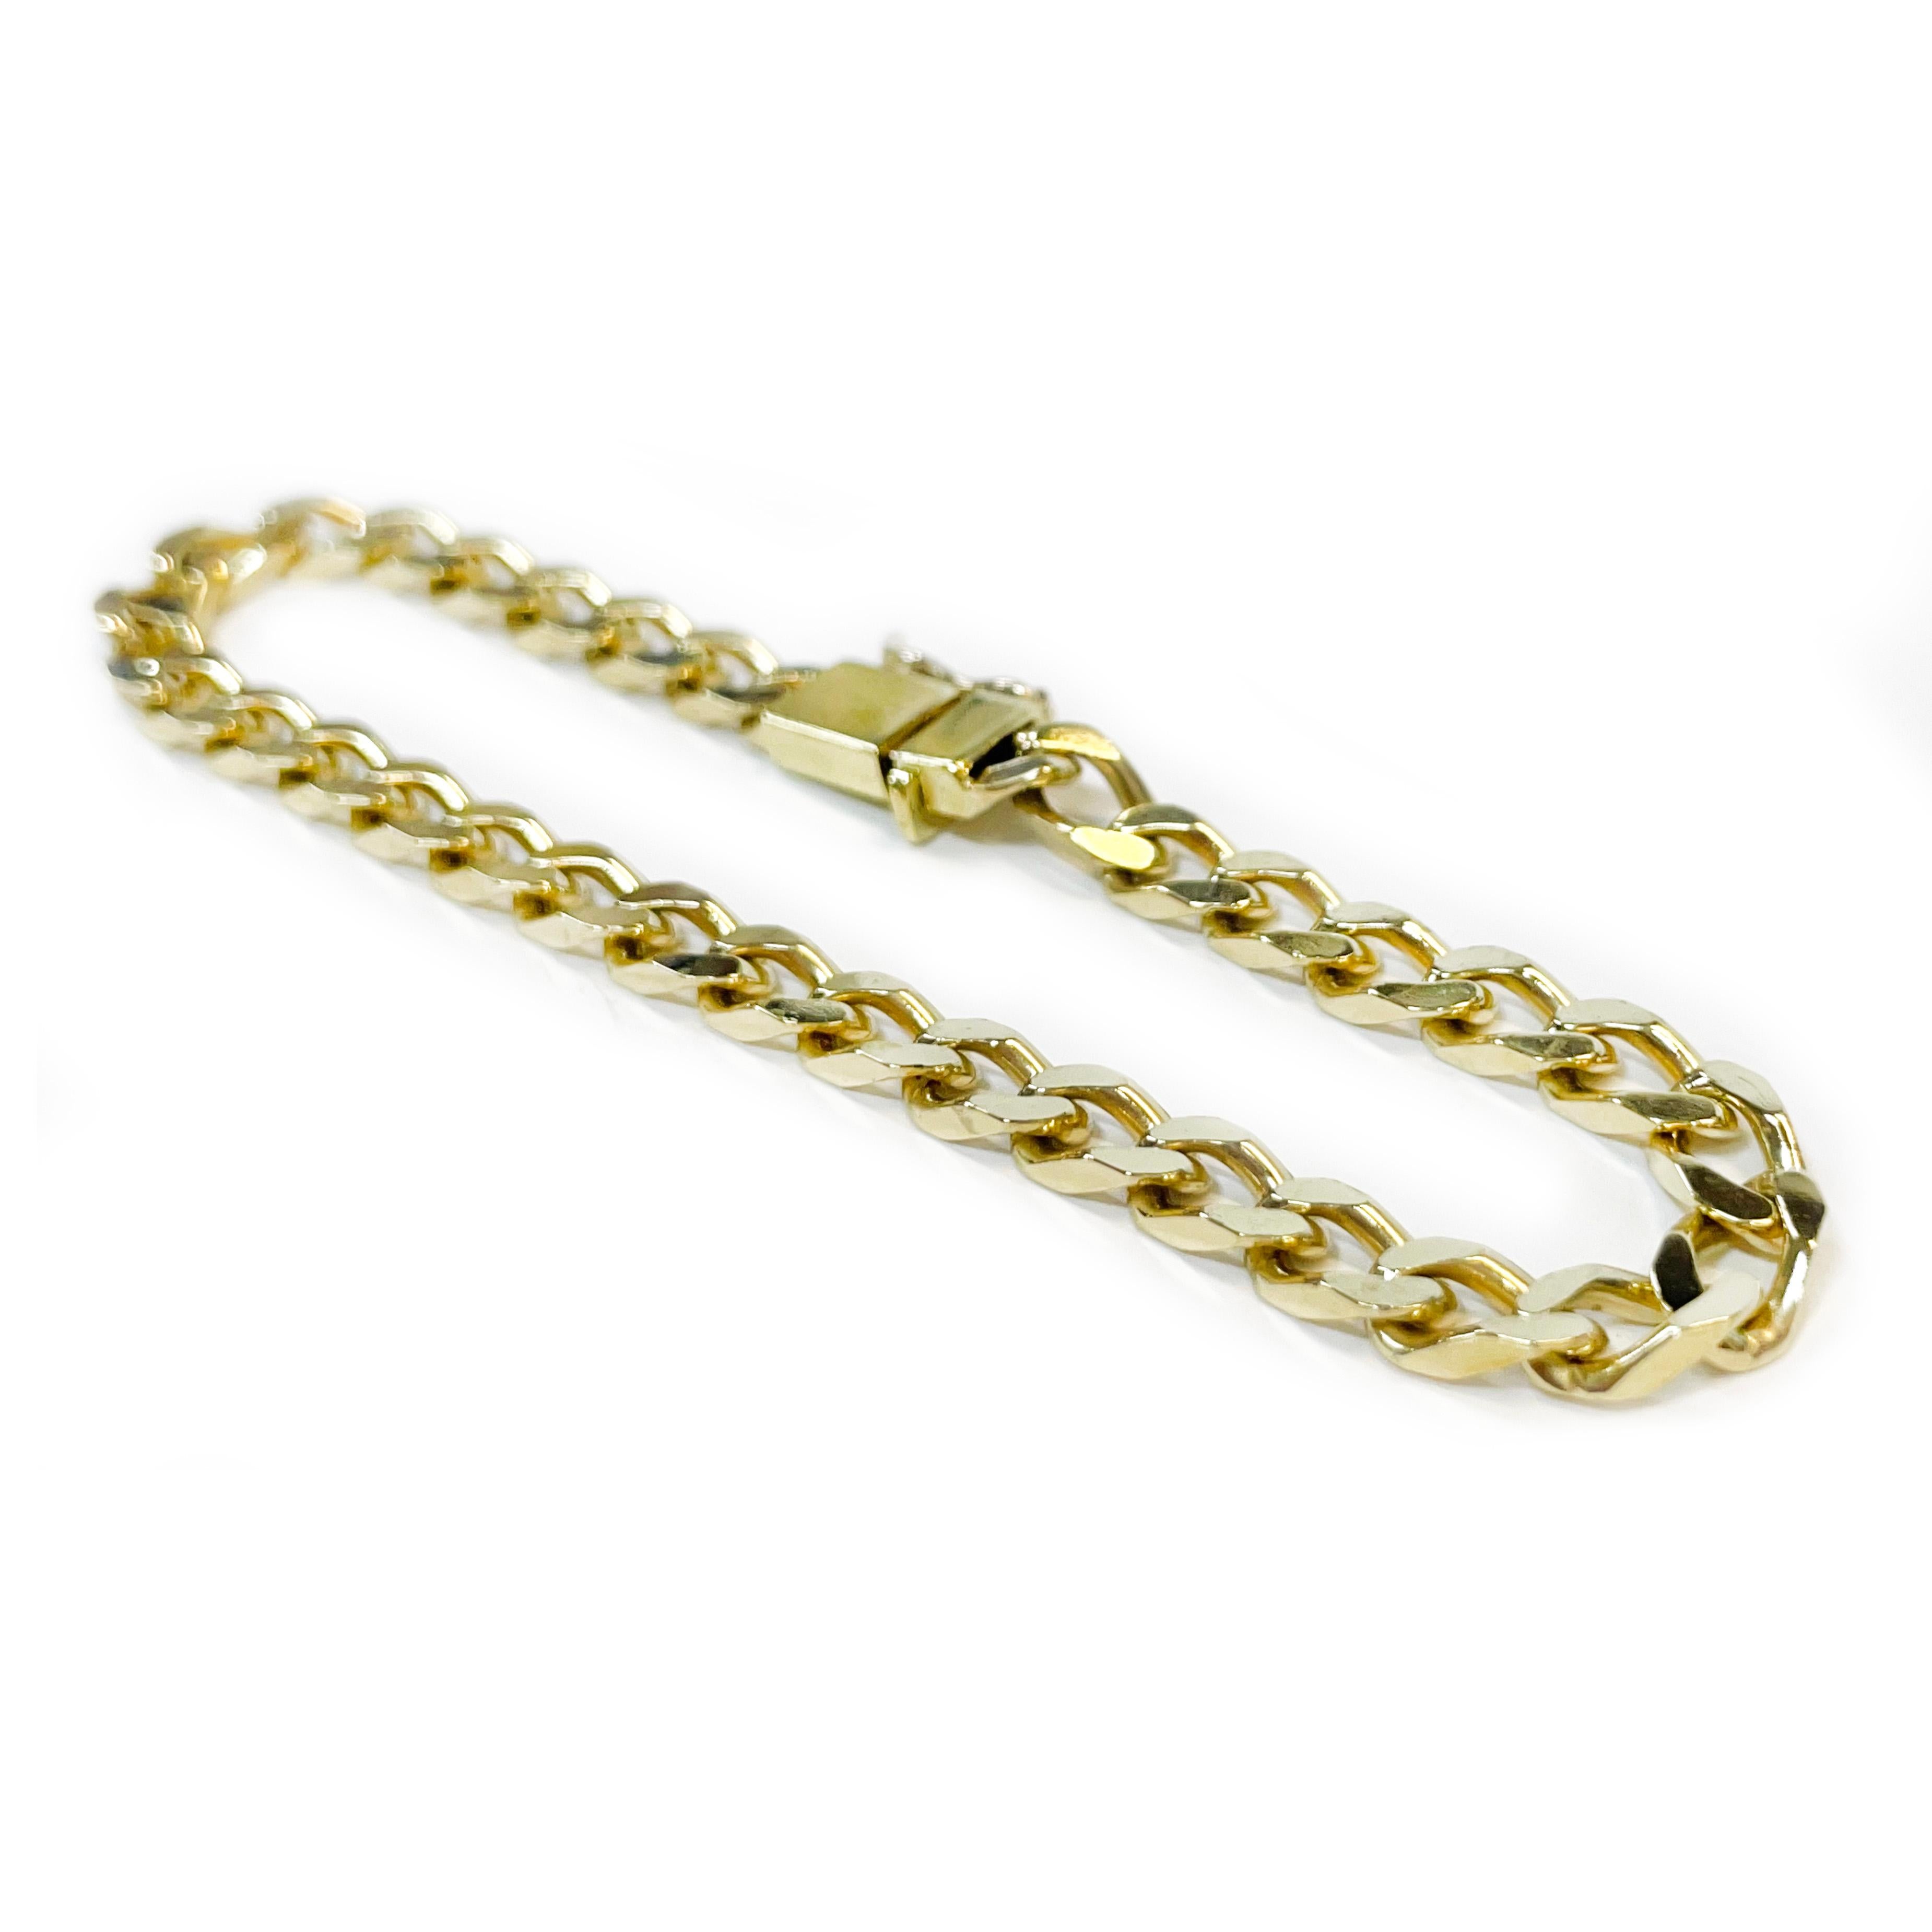 14 Karat Yellow Gold Flat-Curb Link Bracelet. This bracelet features 4.8 x 8.6mm flat-curbed links. The bracelet has an overall smooth shiny finish. The bracelet is 7